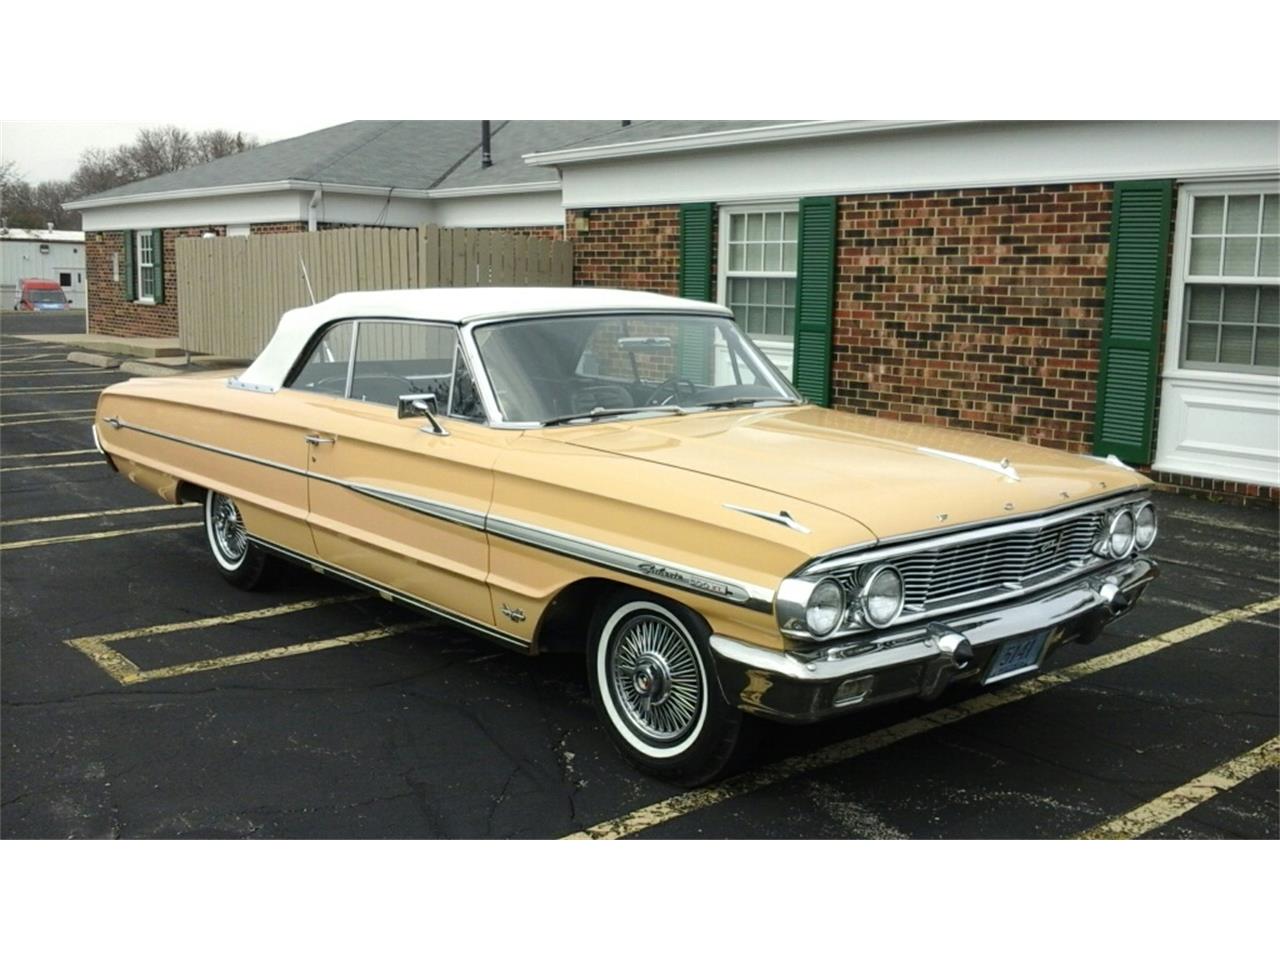 1964 Ford Galaxie 500 XL Convertible for Sale ...